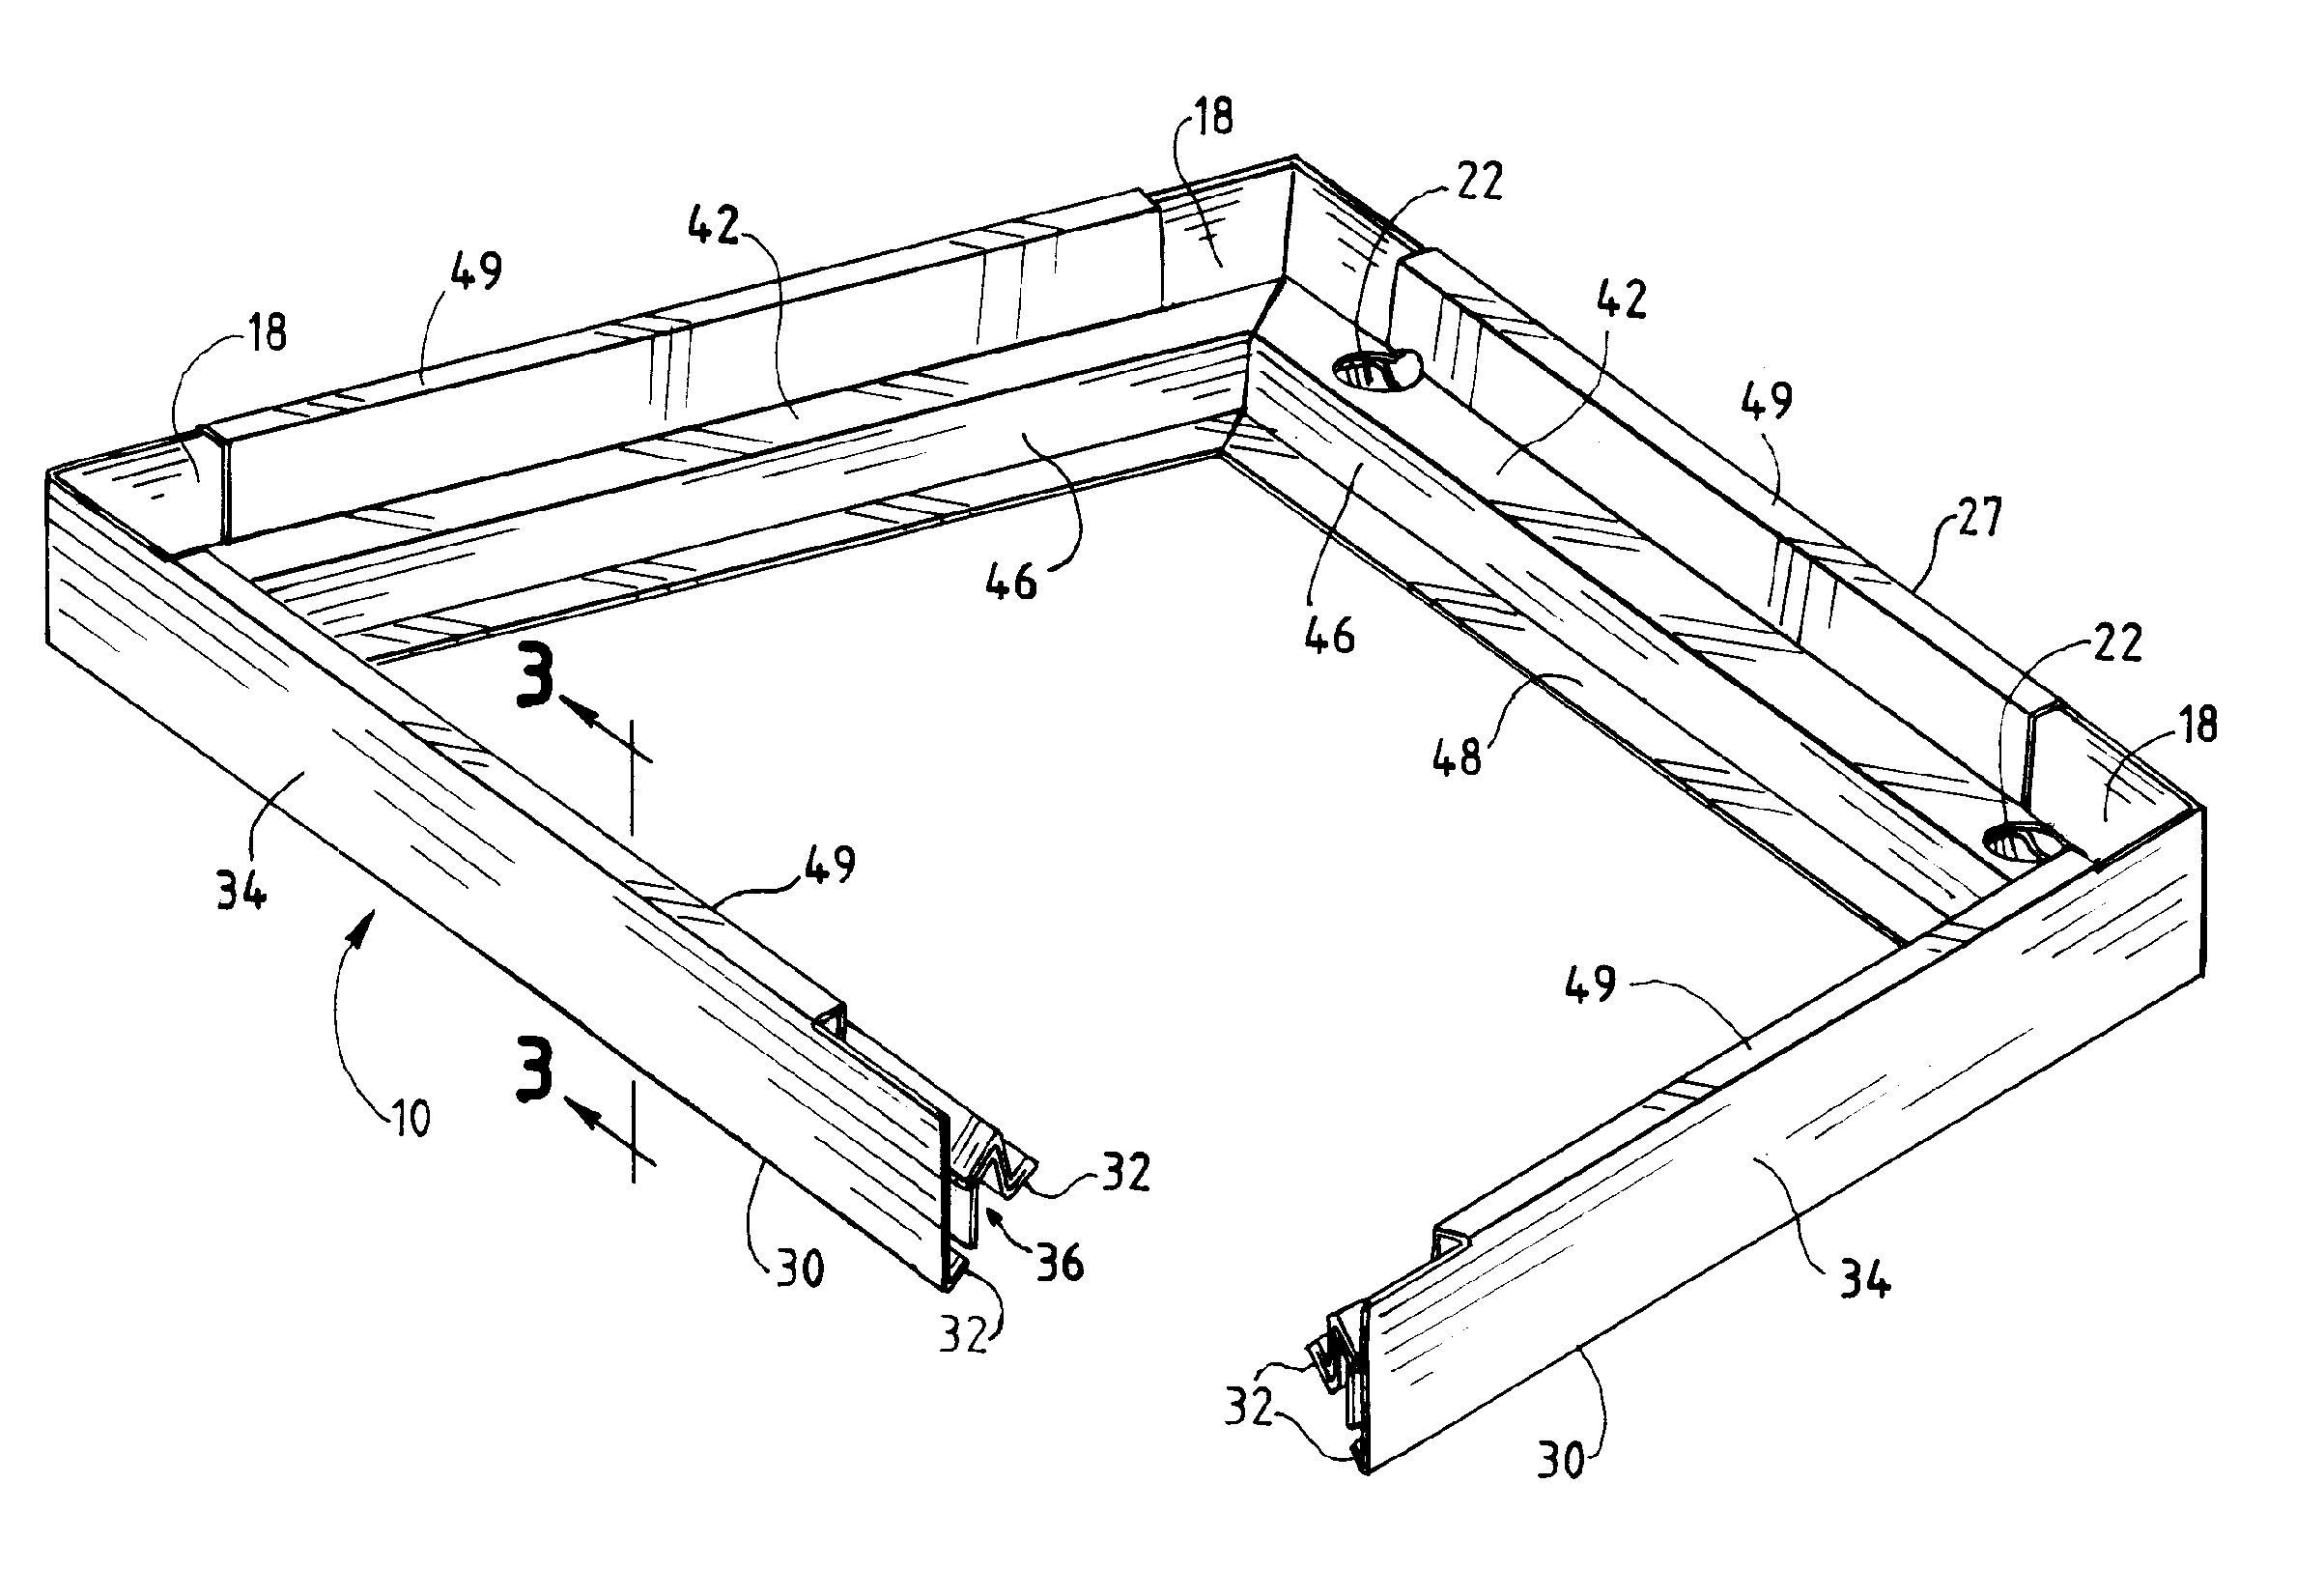 Tubular structure for supporting a product